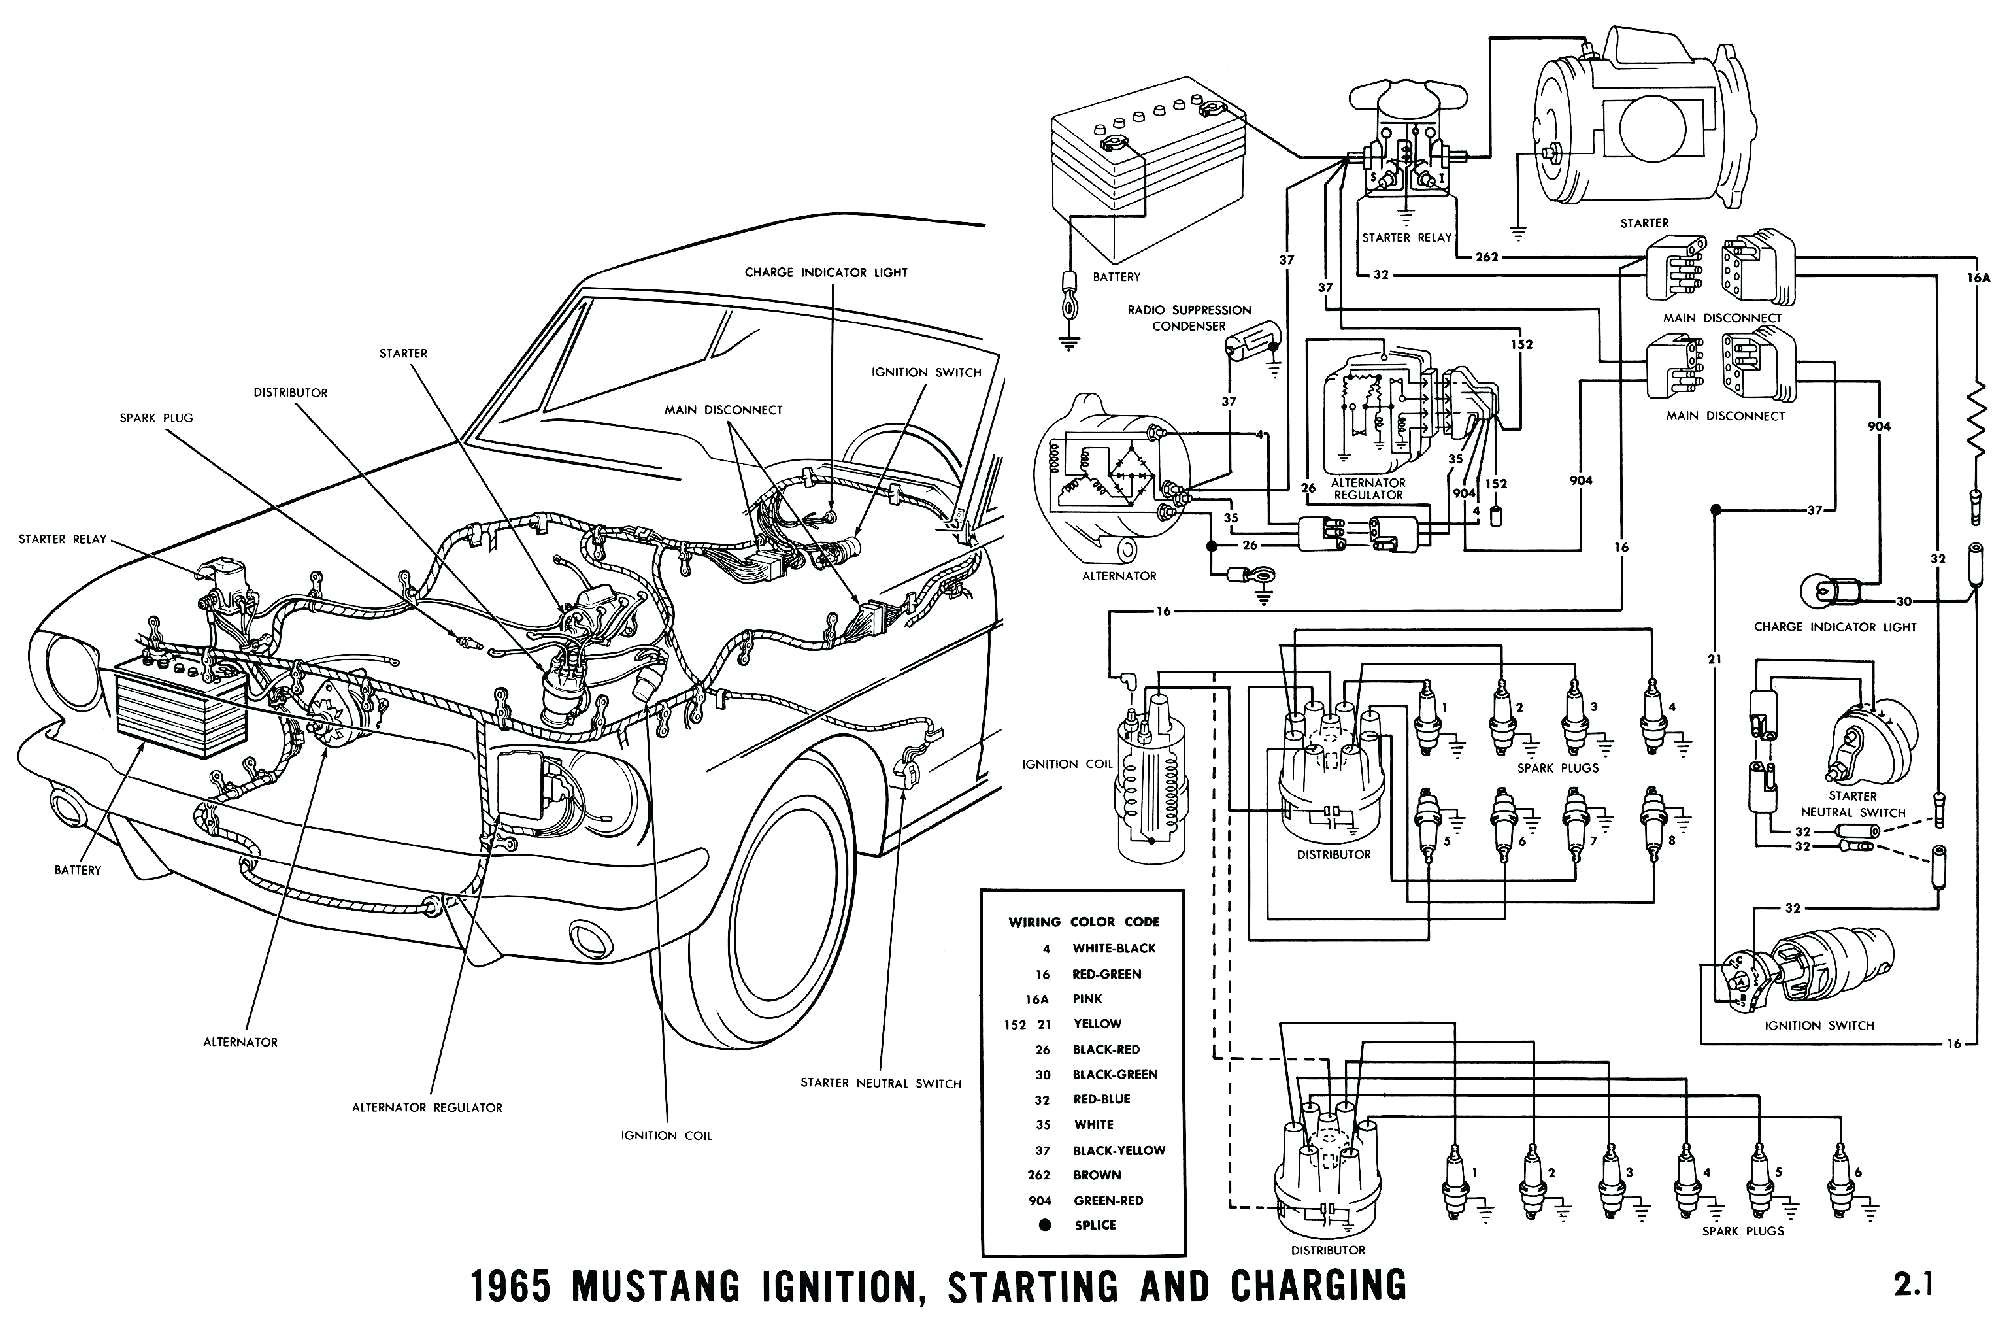 Motorcycle Cd70 Engine Diagram Bmw Motorcycle Engine Diagram Parts A Mopeds Motor Wiring Of Motorcycle Cd70 Engine Diagram